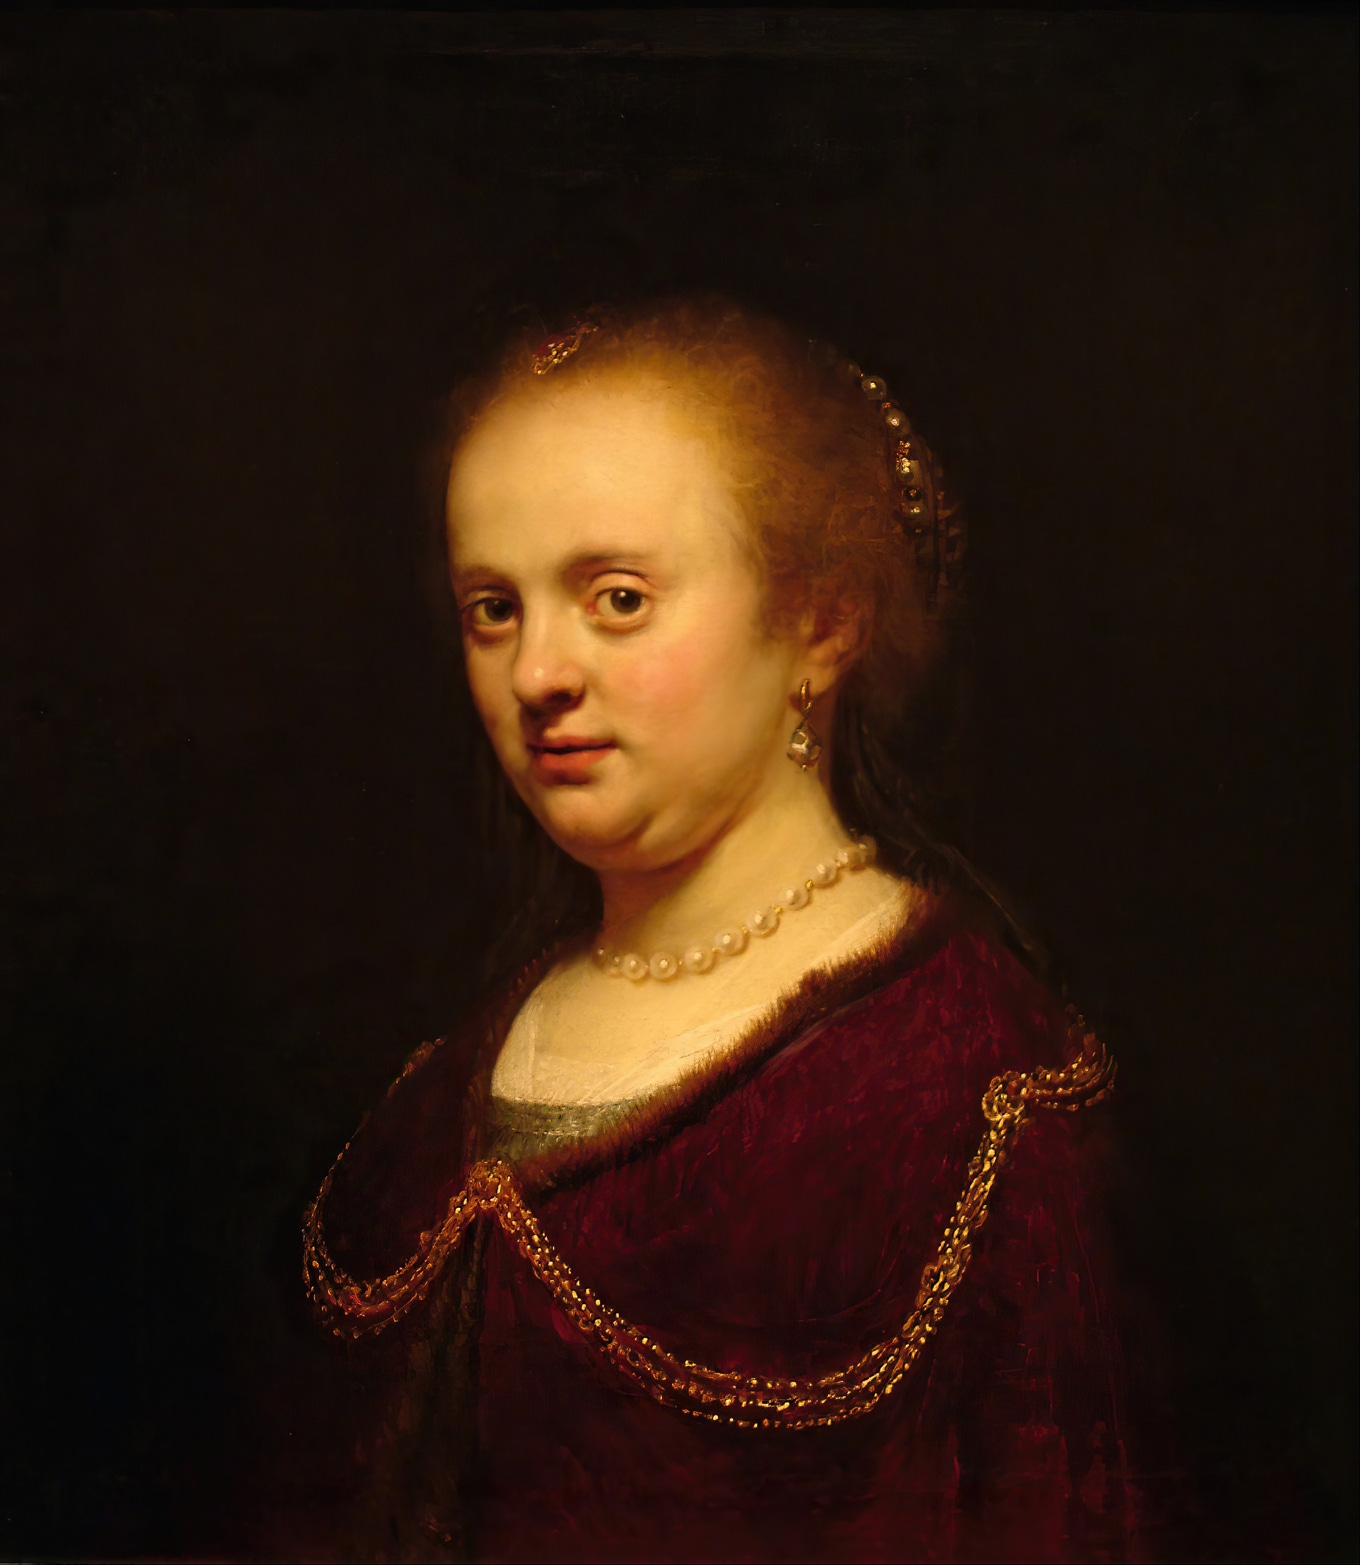 Young Woman with a Gold Chain (1634) by Rembrandt van Rijn